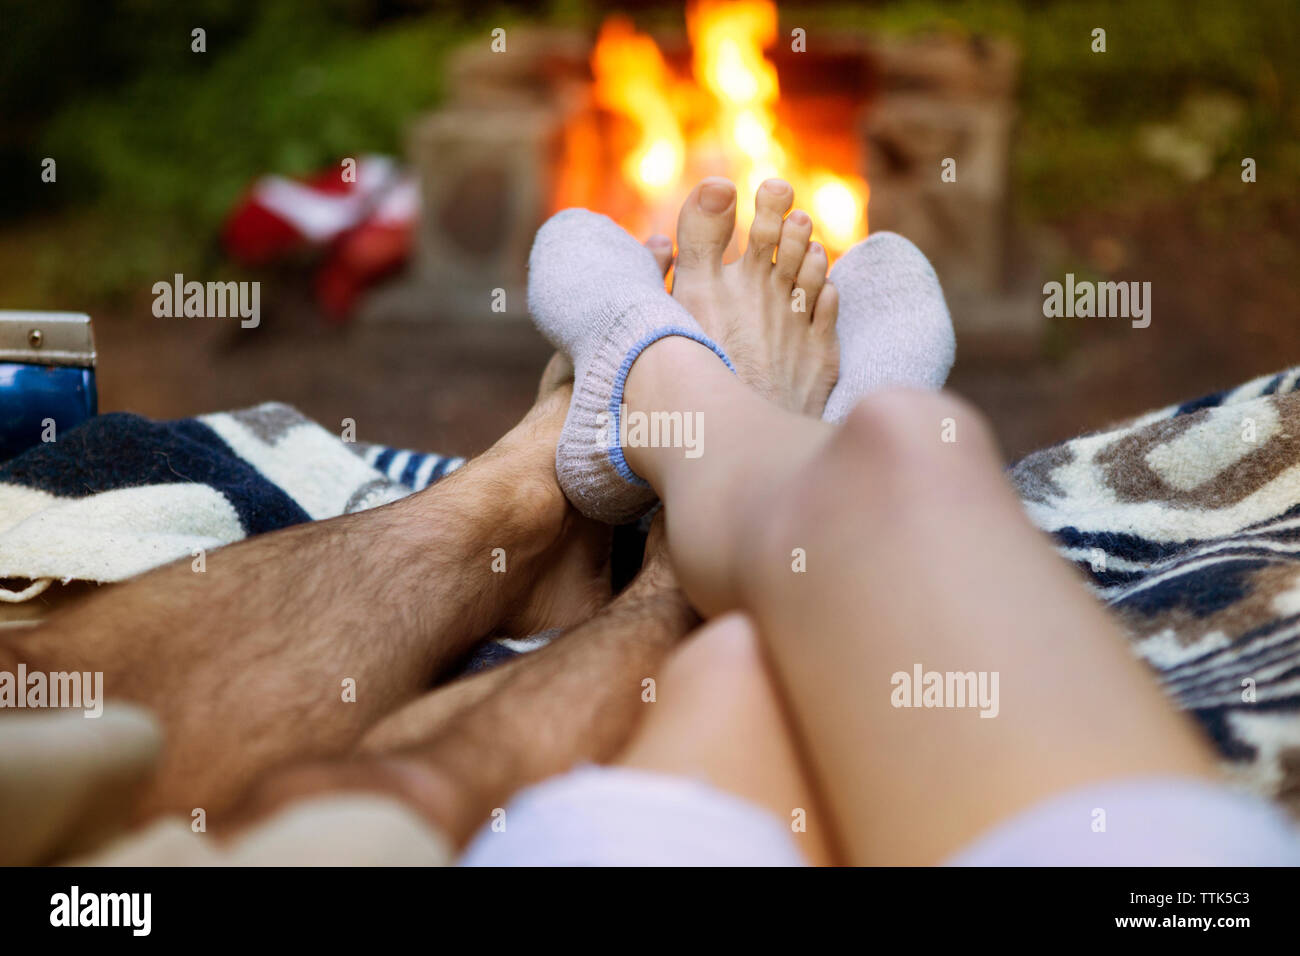 Low section of couple lying in pick-up truck with campfire in background Stock Photo